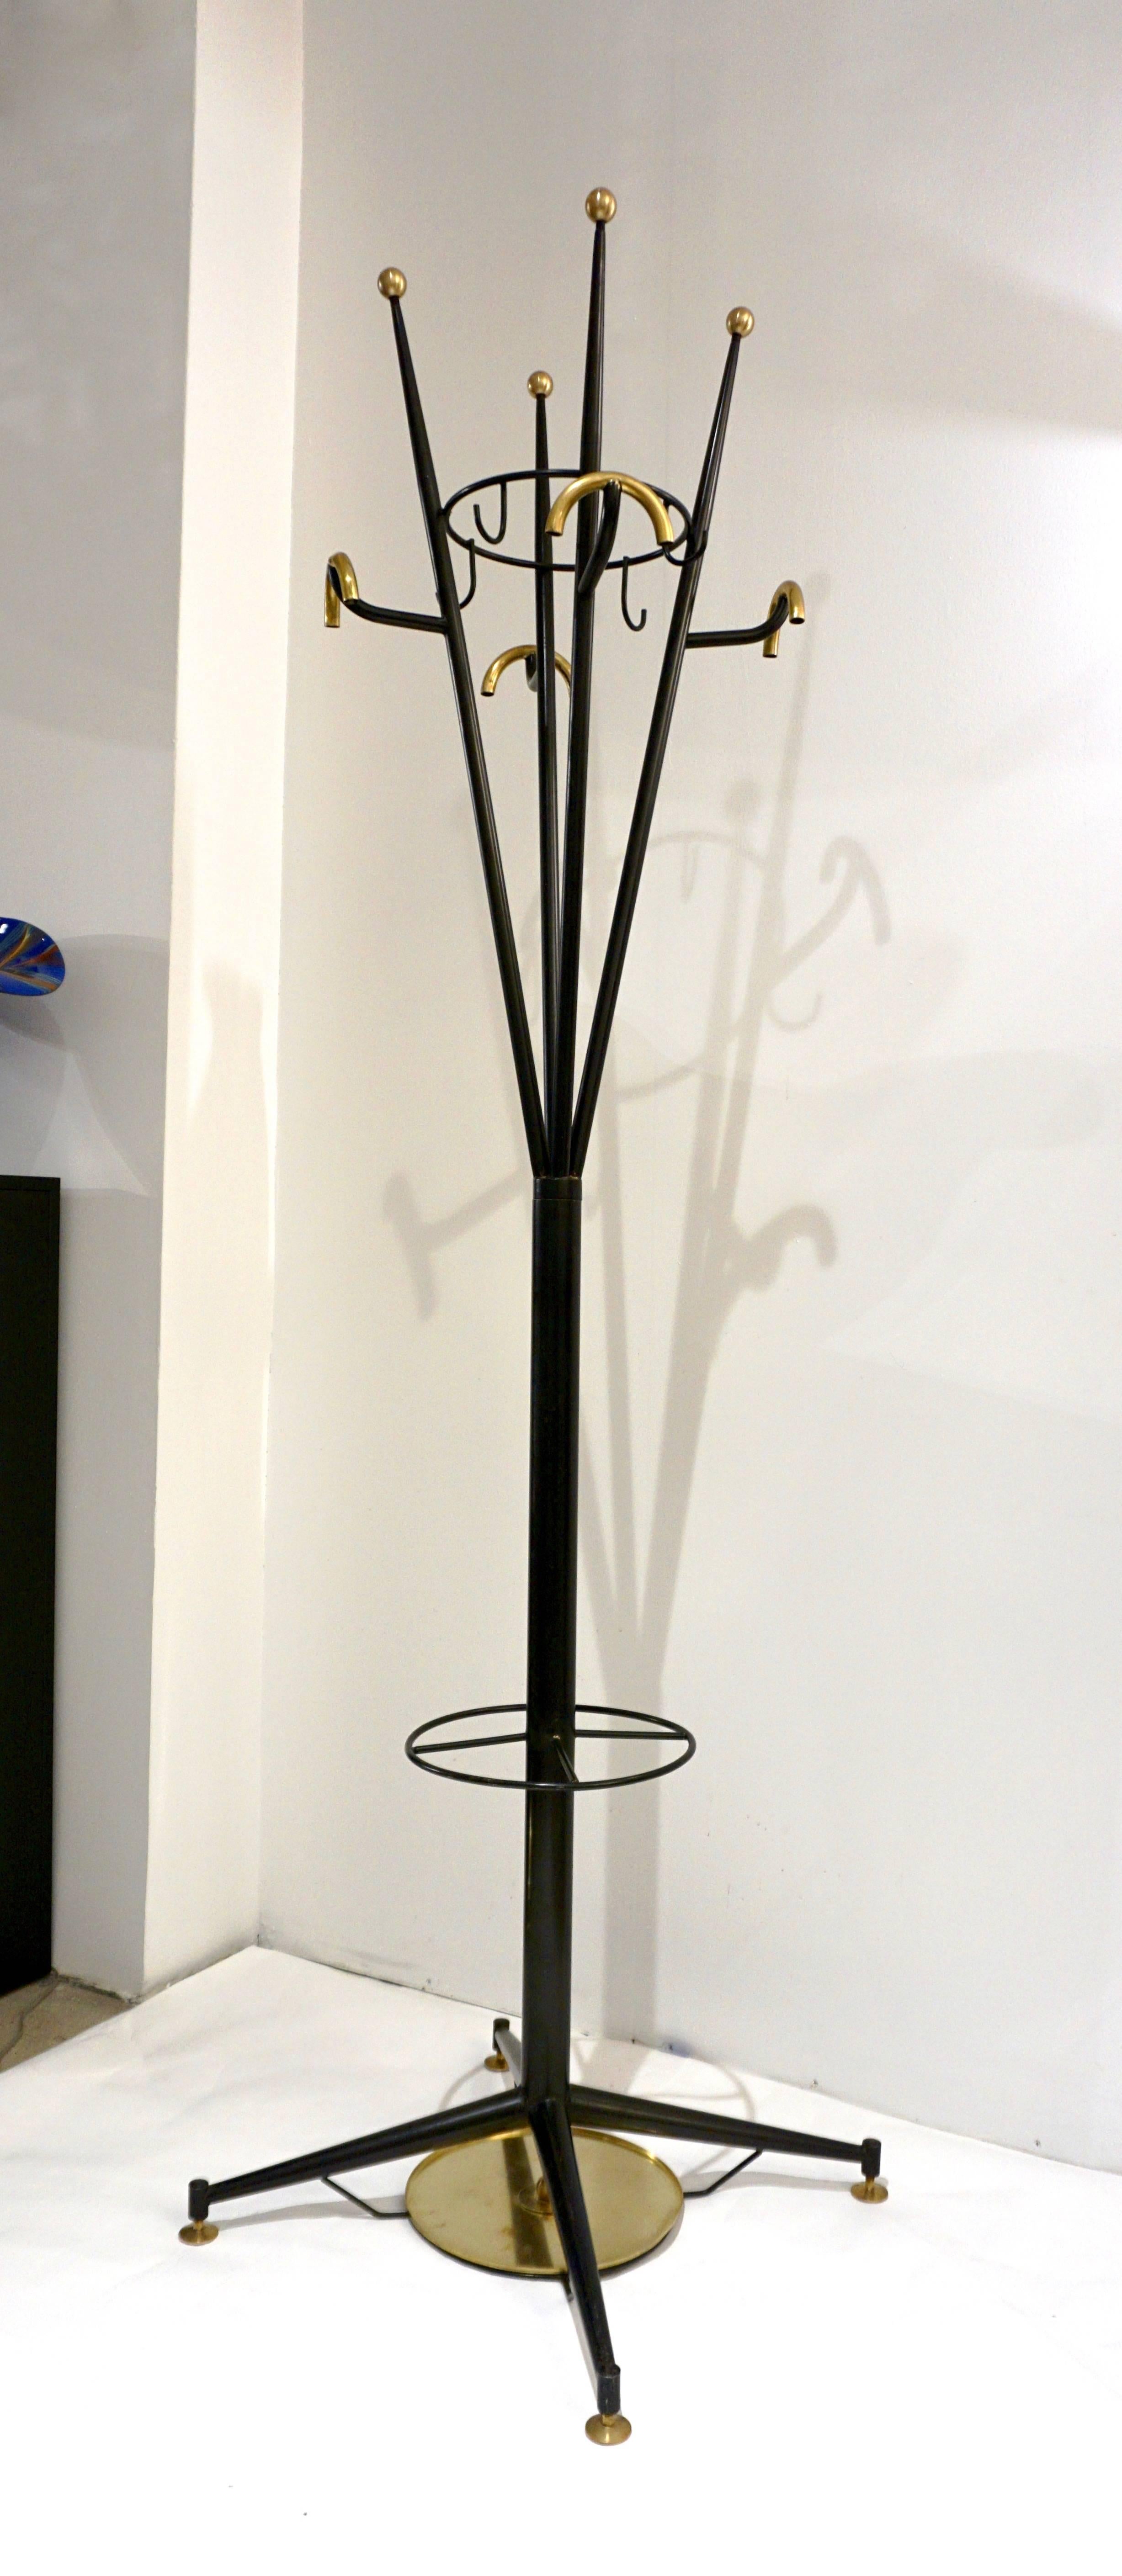 1980s Italian Modern Black Lacquered and Gold Brass Coat Rack or Umbrella Stand 3